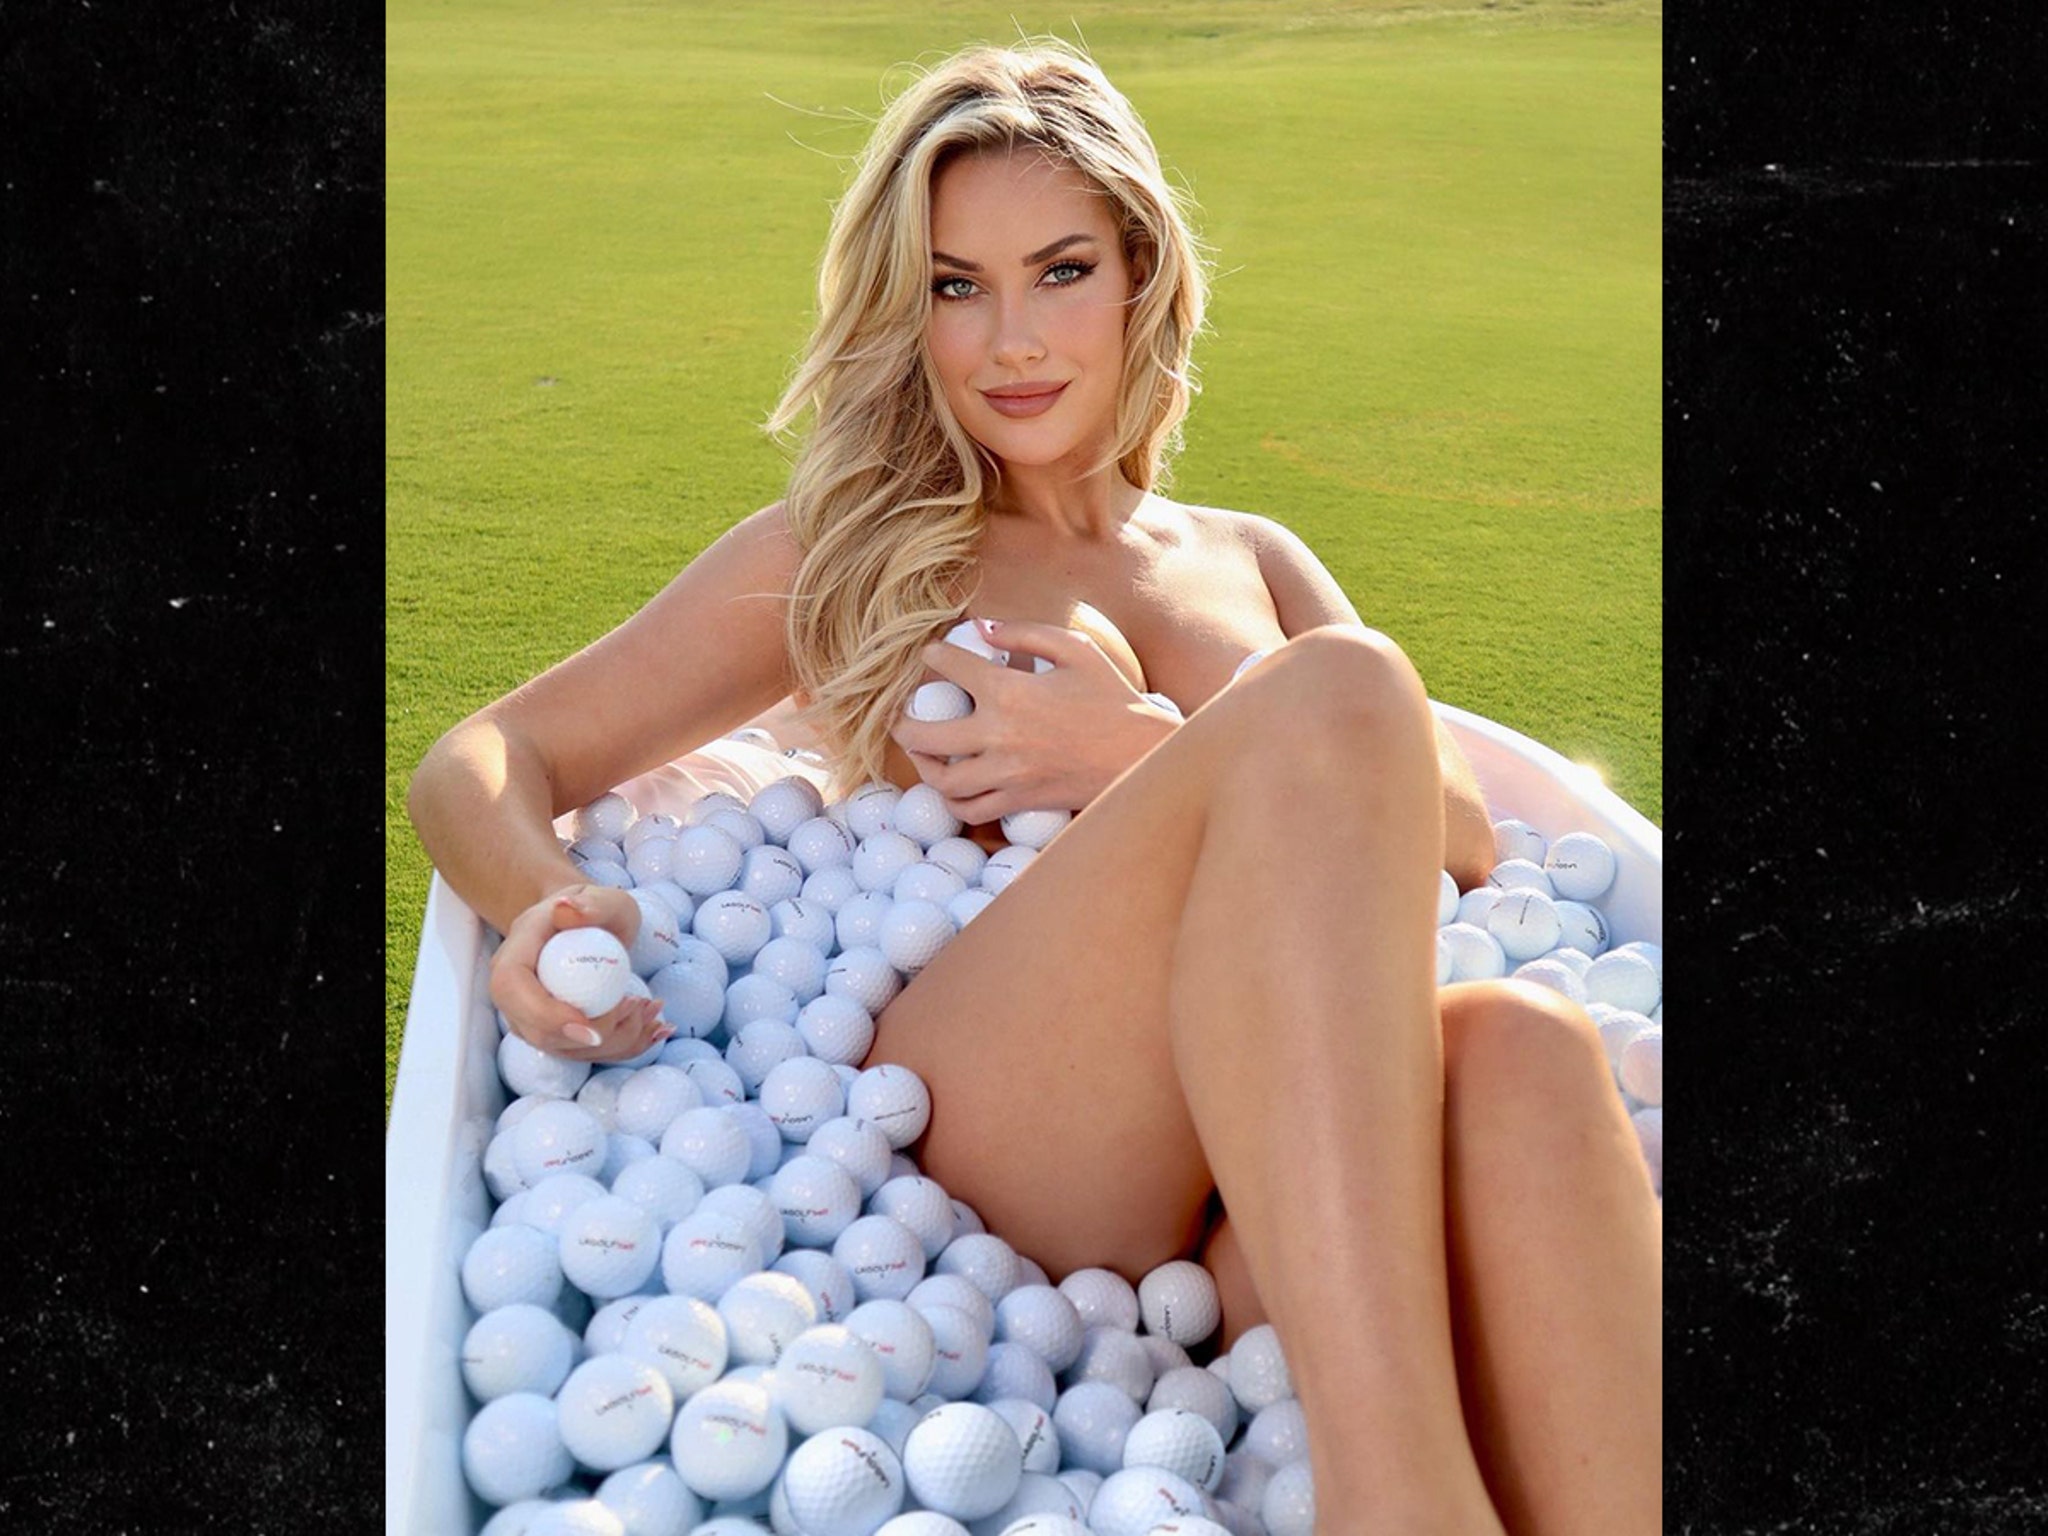 Golf Star Paige Spiranac Poses Naked In Tub Full Of Balls, Jan Stephenson Style! pic